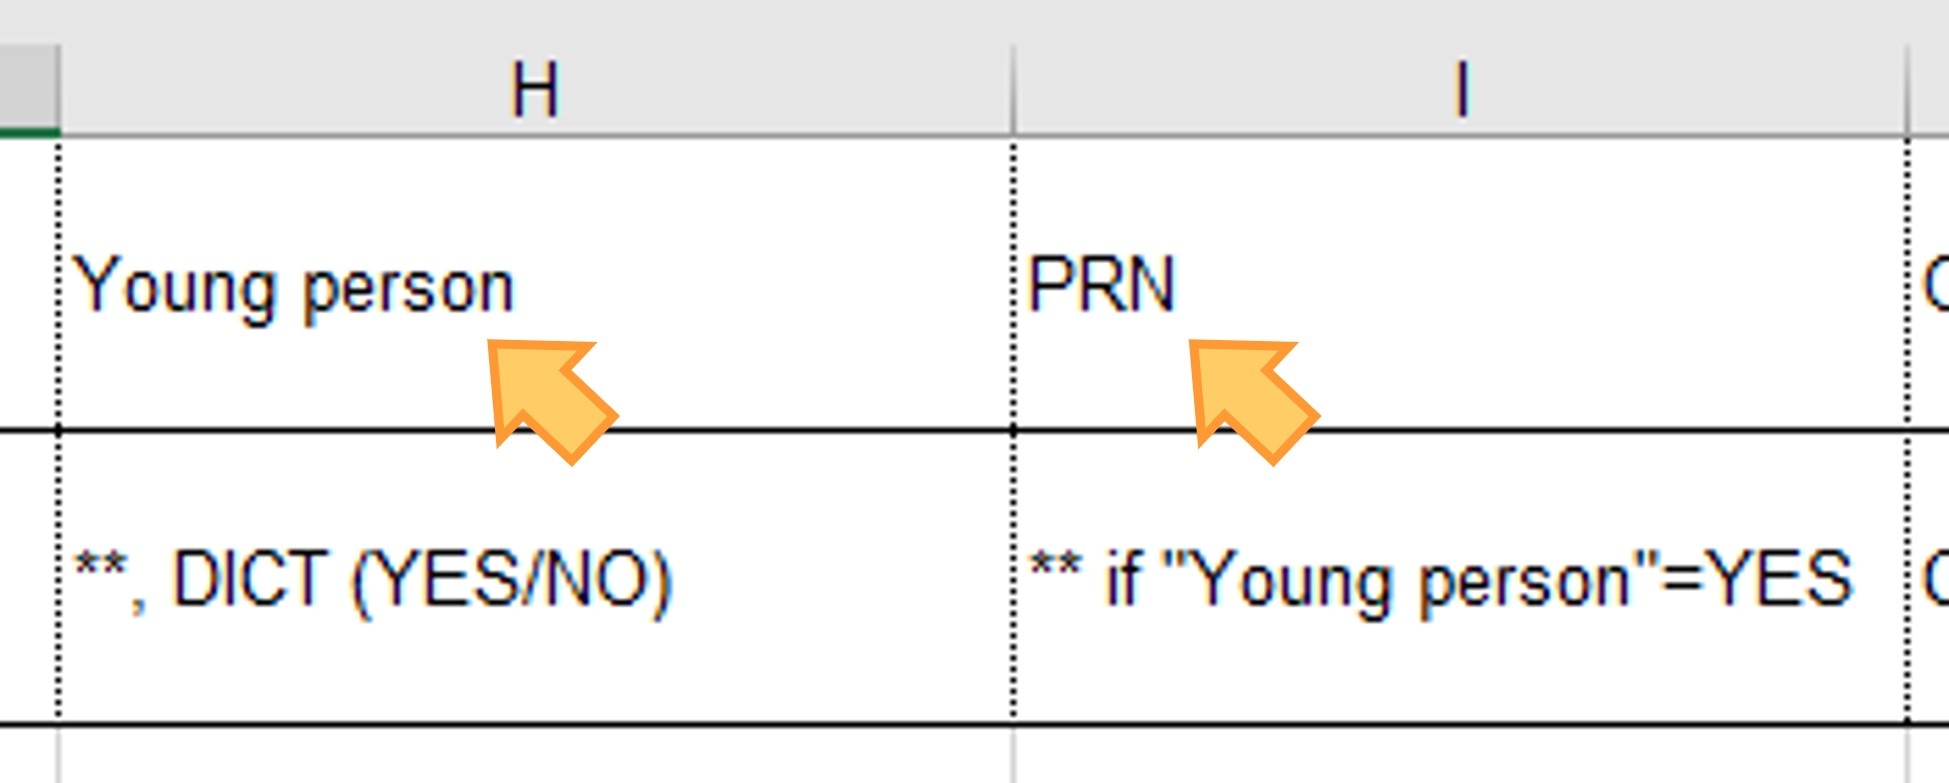 Young person and PRN columns